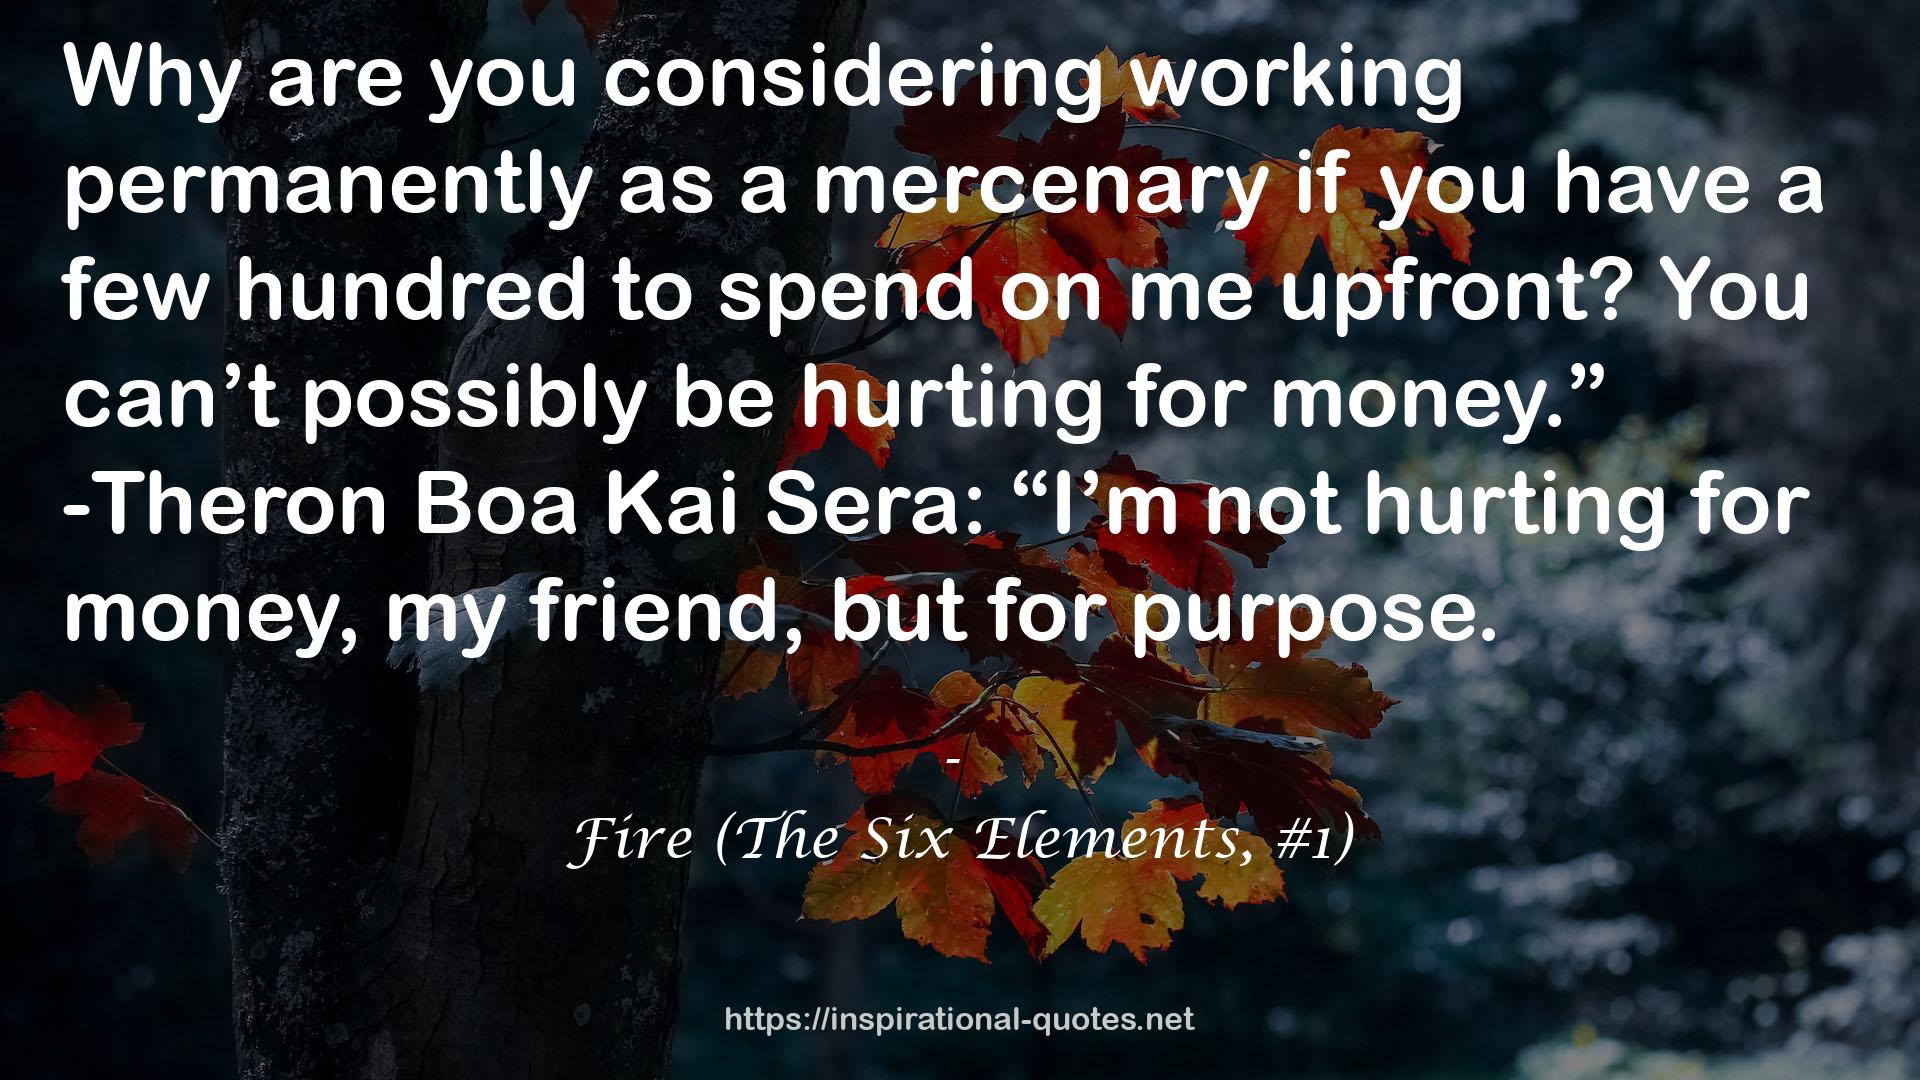 Fire (The Six Elements, #1) QUOTES